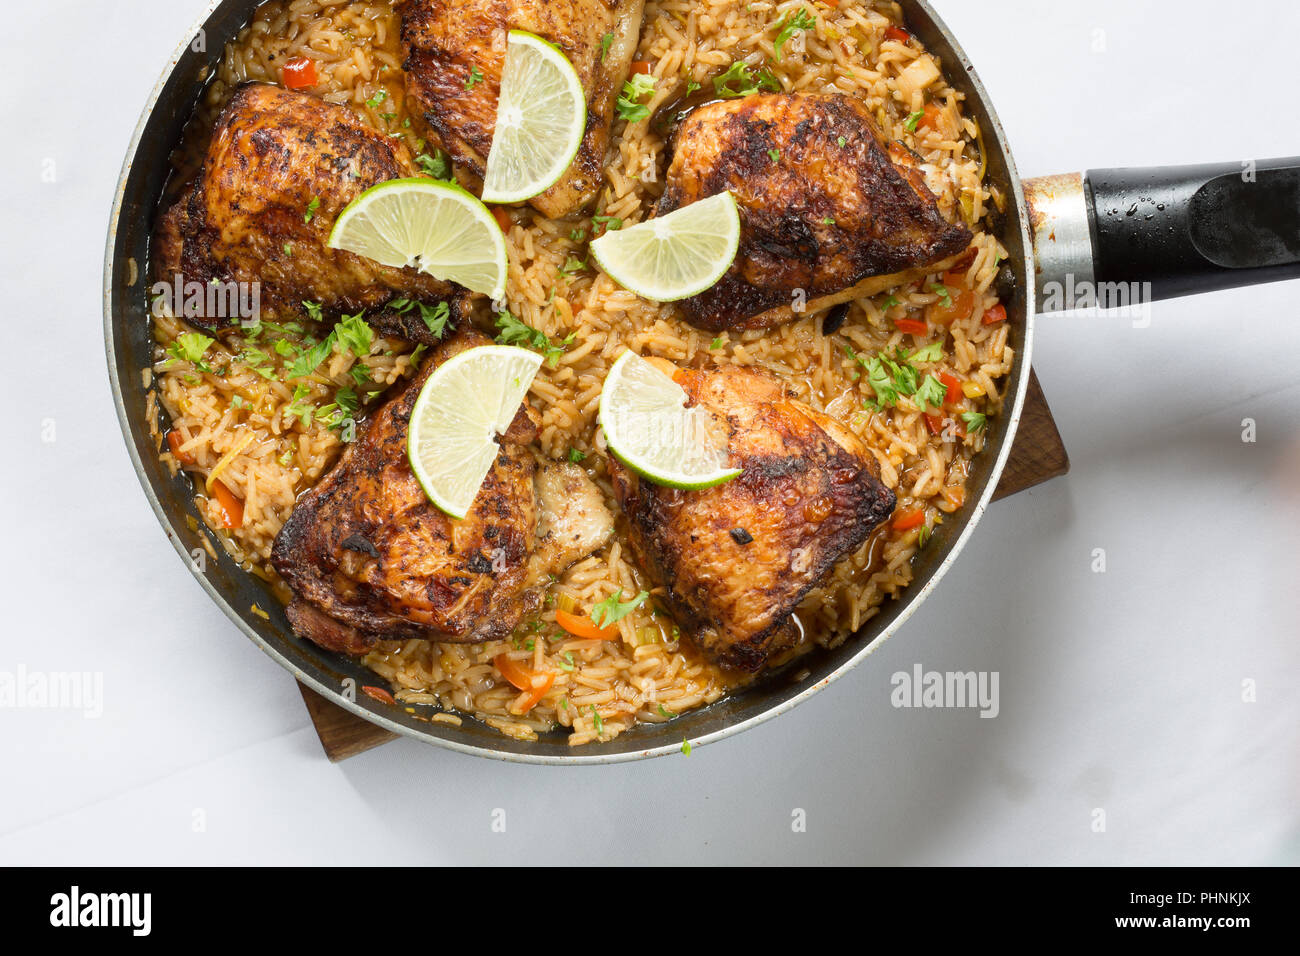 One pan dish of Mexican Chili lime Chicken and rice Stock Photo